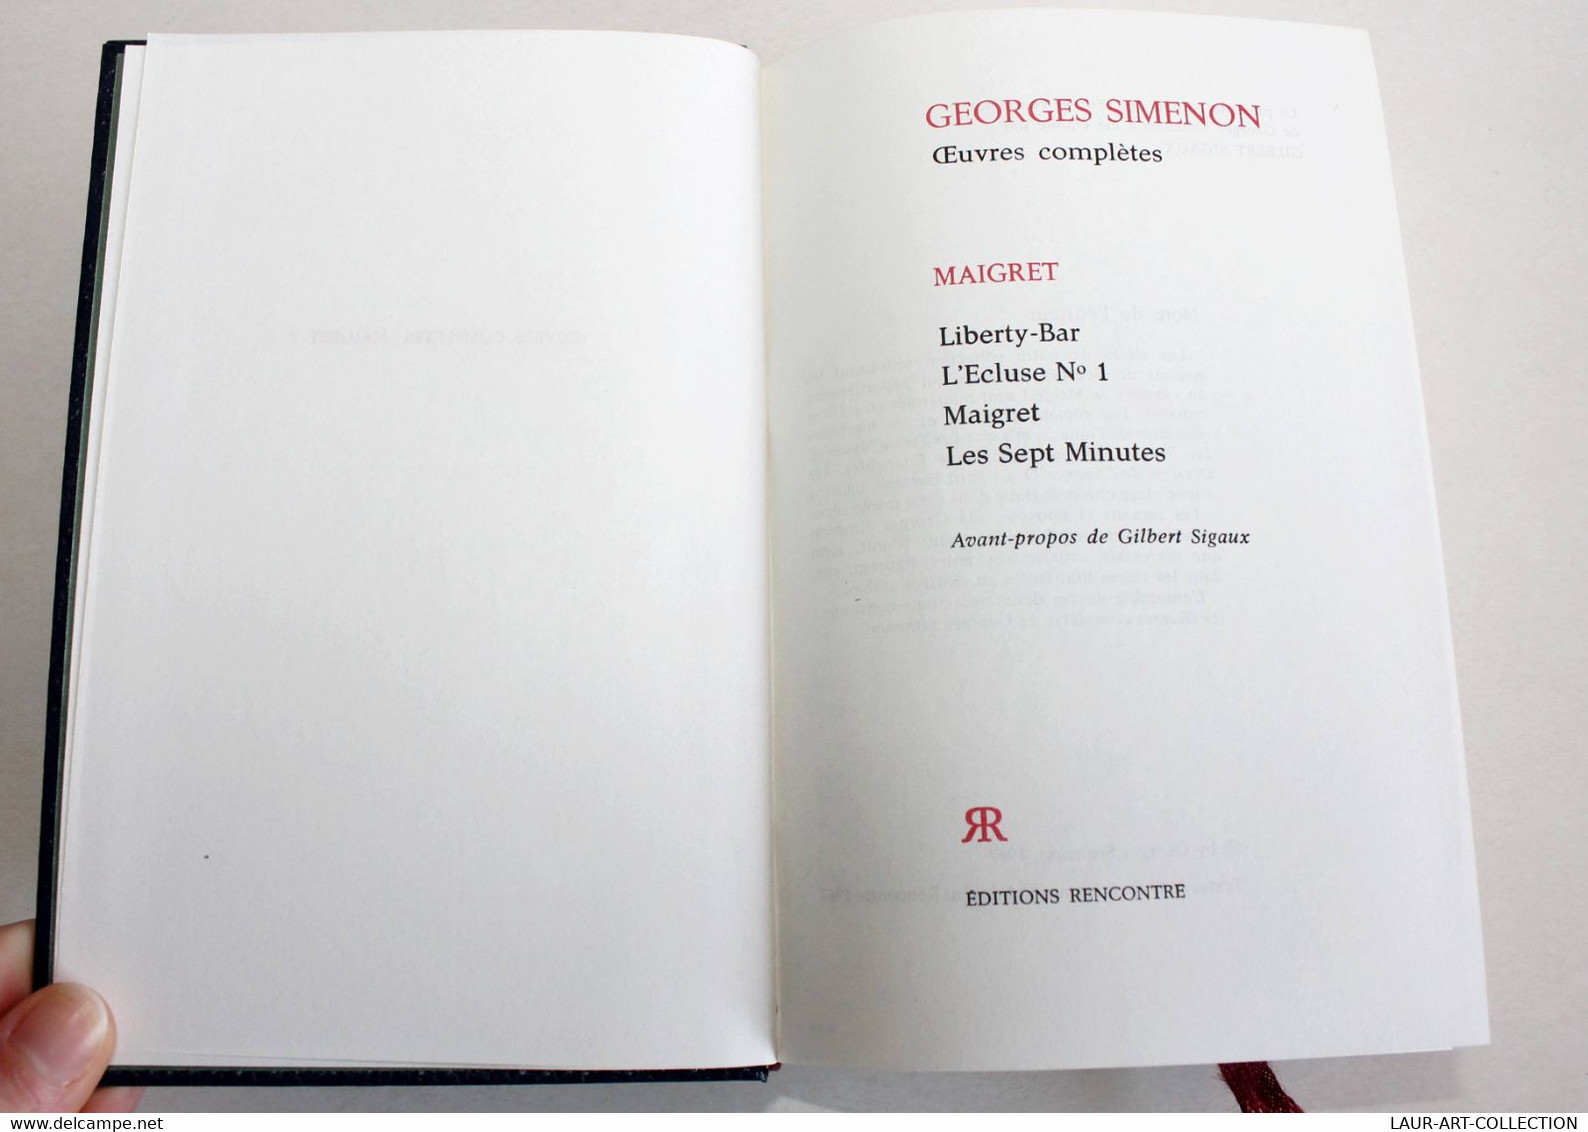 GEORGES SIMENON - OEUVRES COMPLETES, MAIGRET N°V LIBERTY-BAR, L'ECLUSE N°1, 7min / ANCIEN LIVRE DE COLLECTION (2301.236) - Simenon